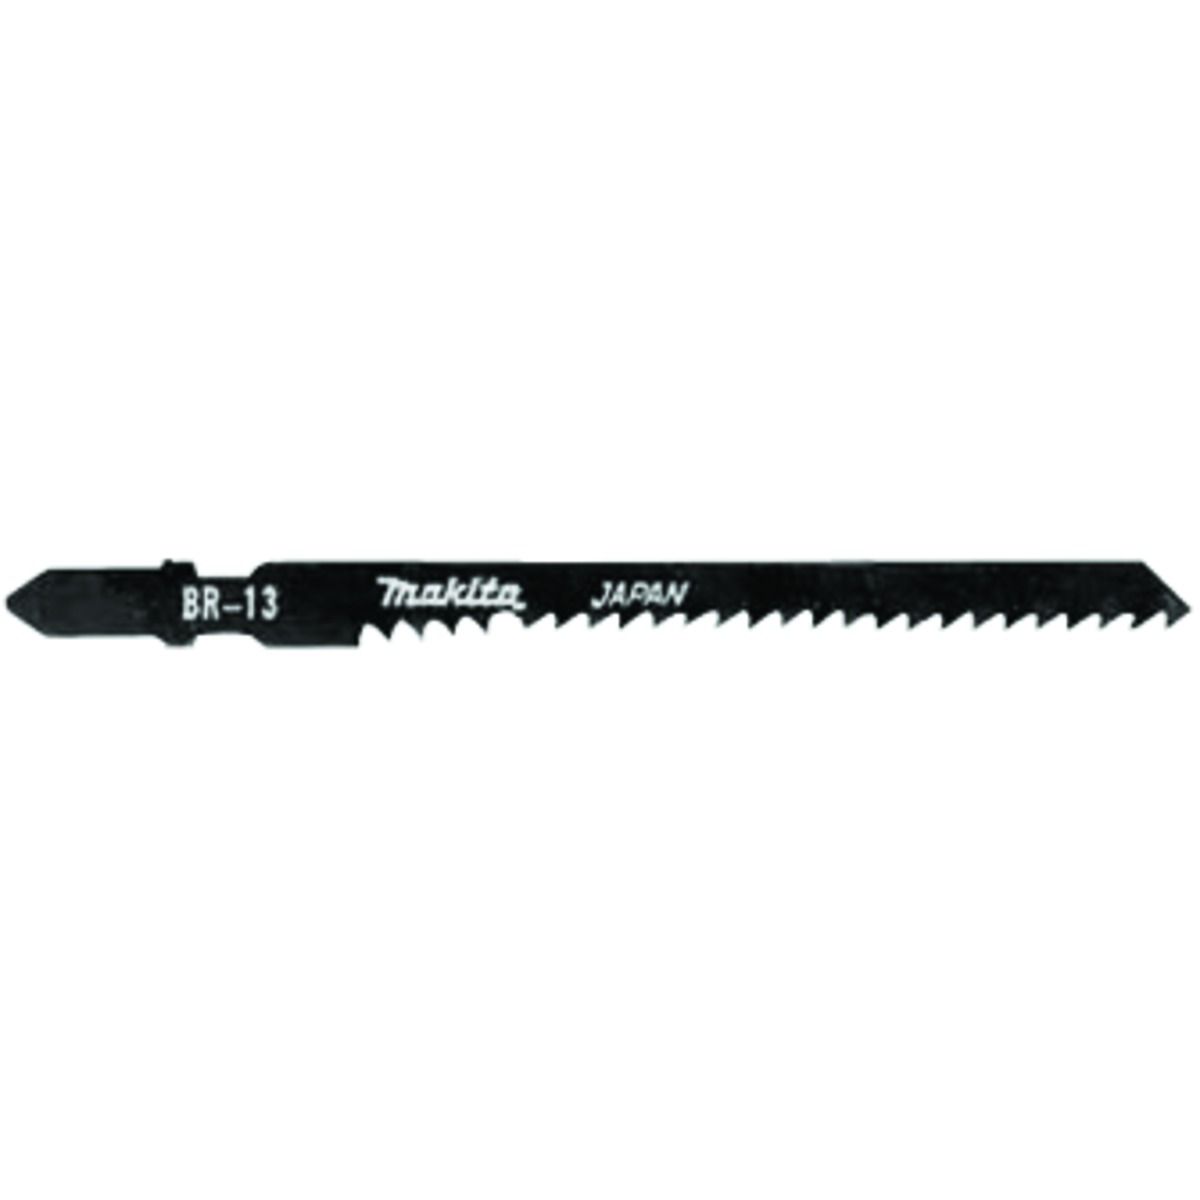 Image of Makita A-85793 Jigsaw Blades for Worktop Finish - Pack of 5